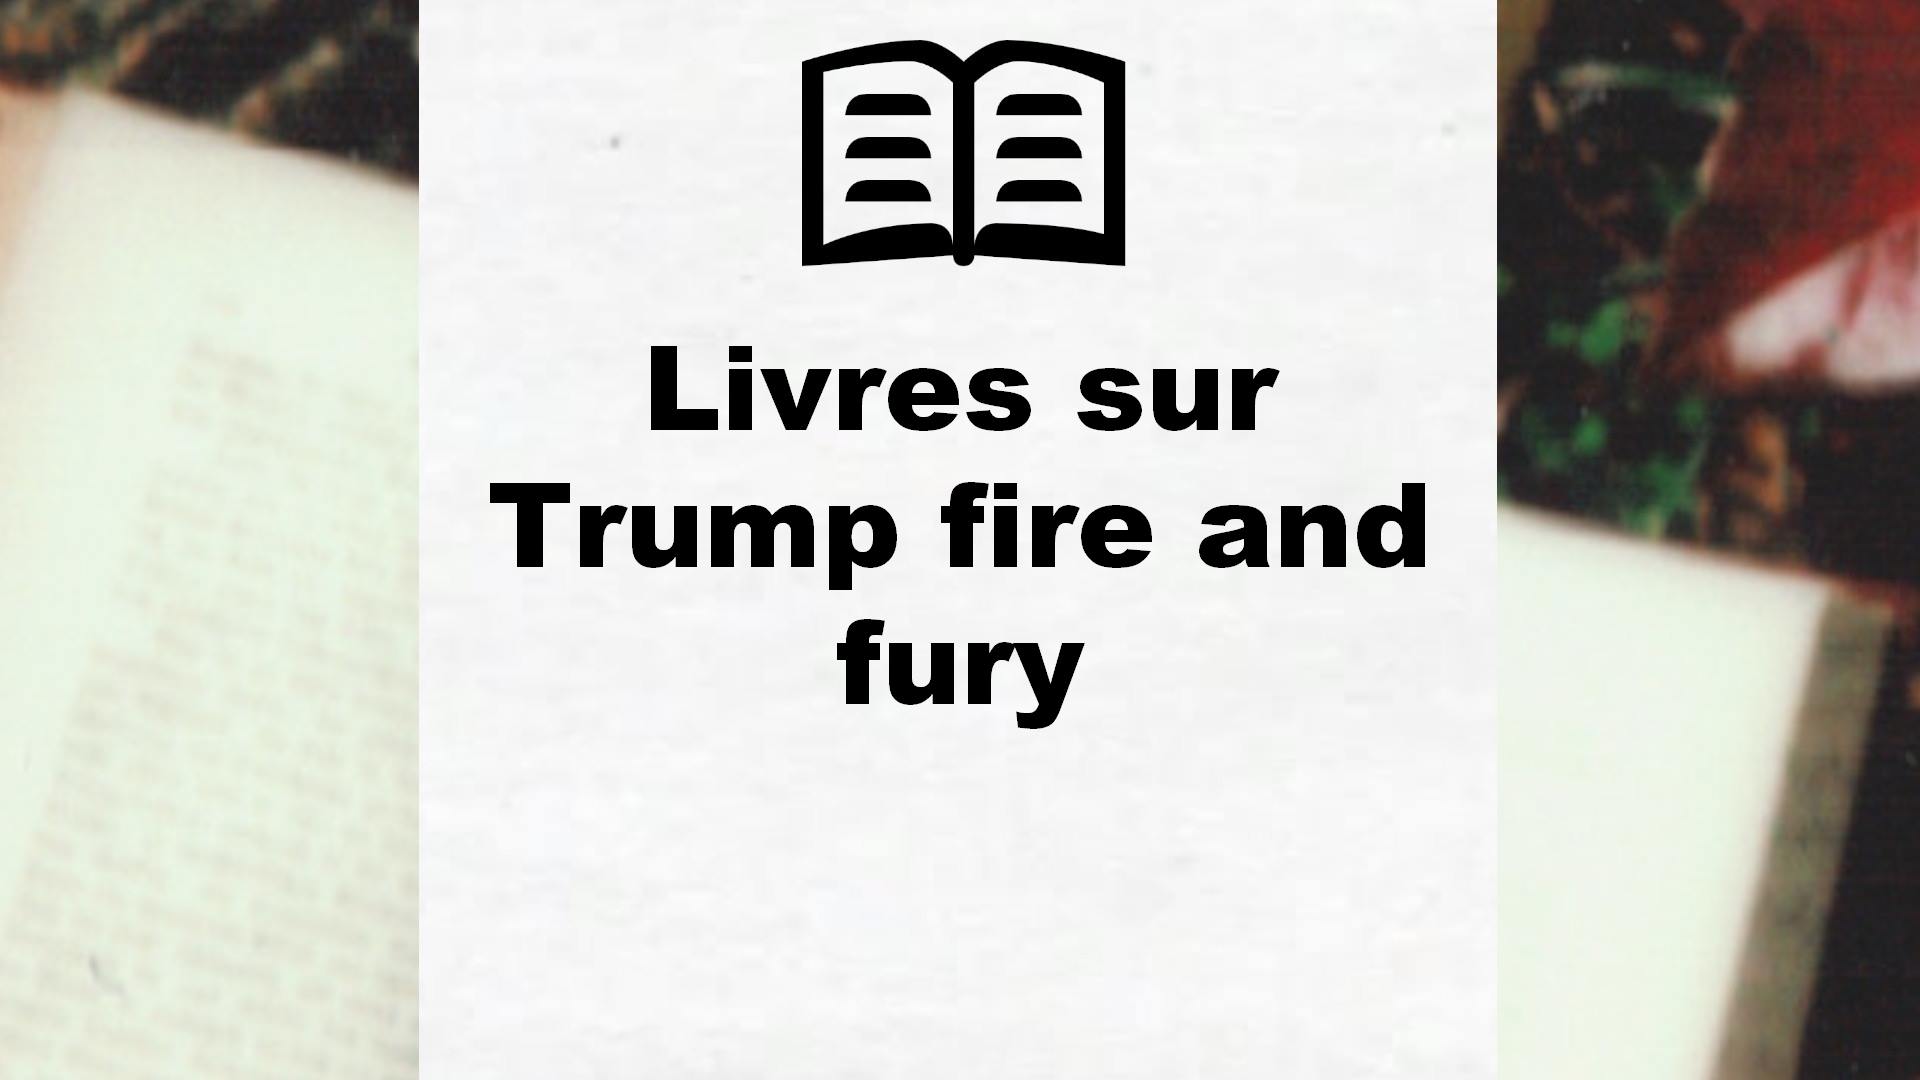 Livres sur Trump fire and fury